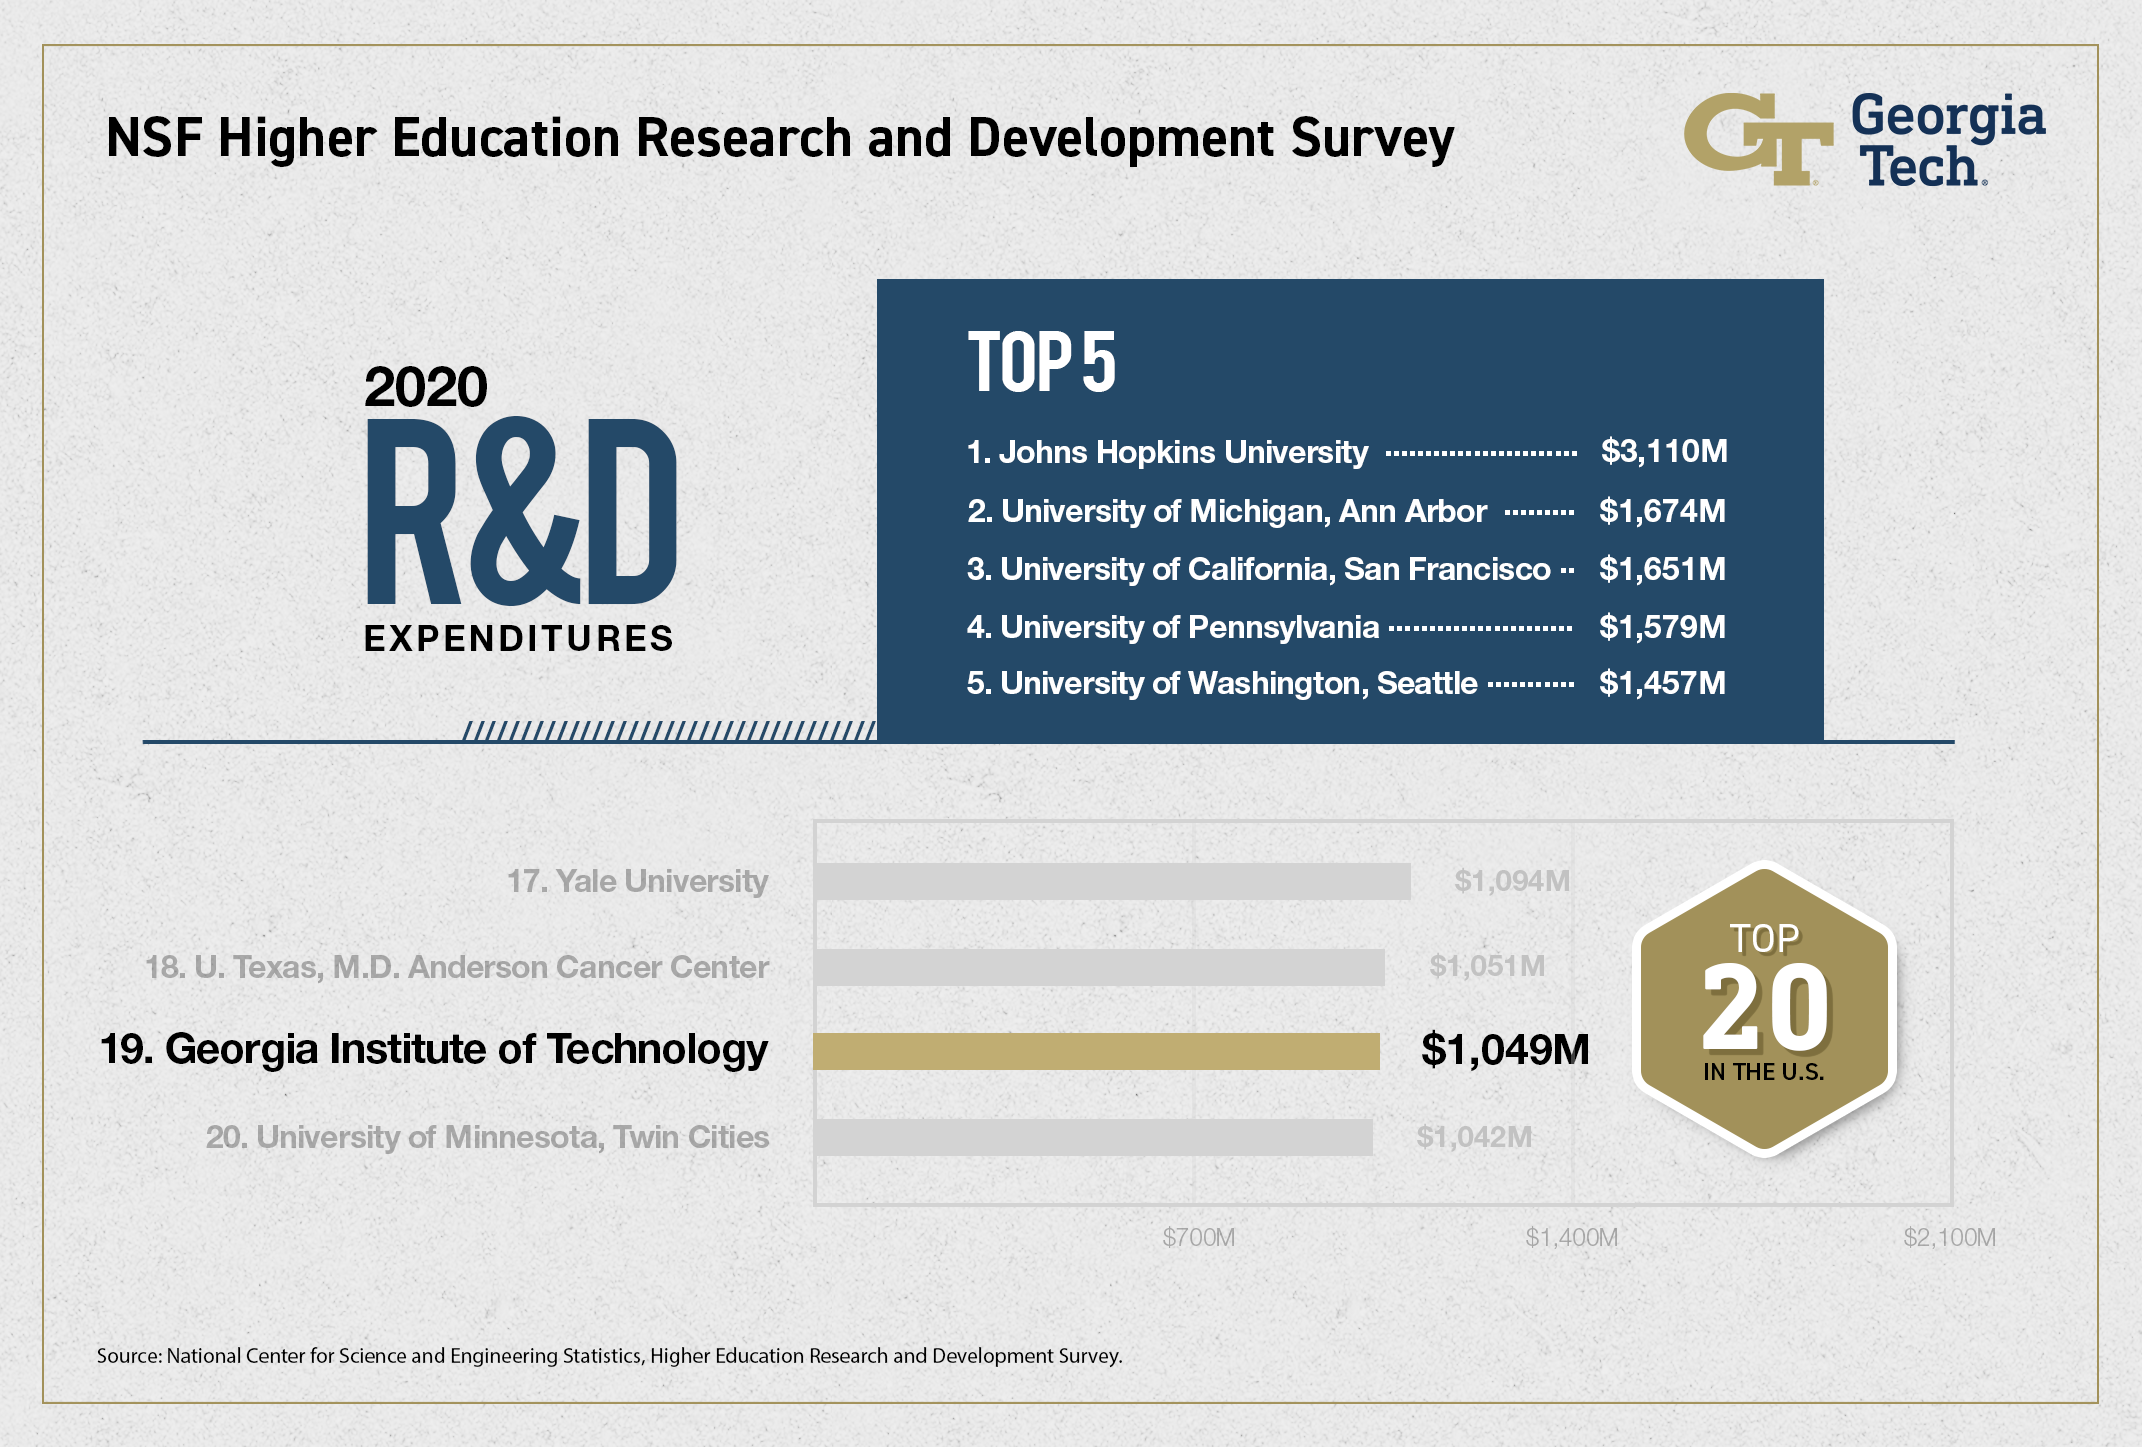 Top US universities for research and development expenditure for fiscal year 2020